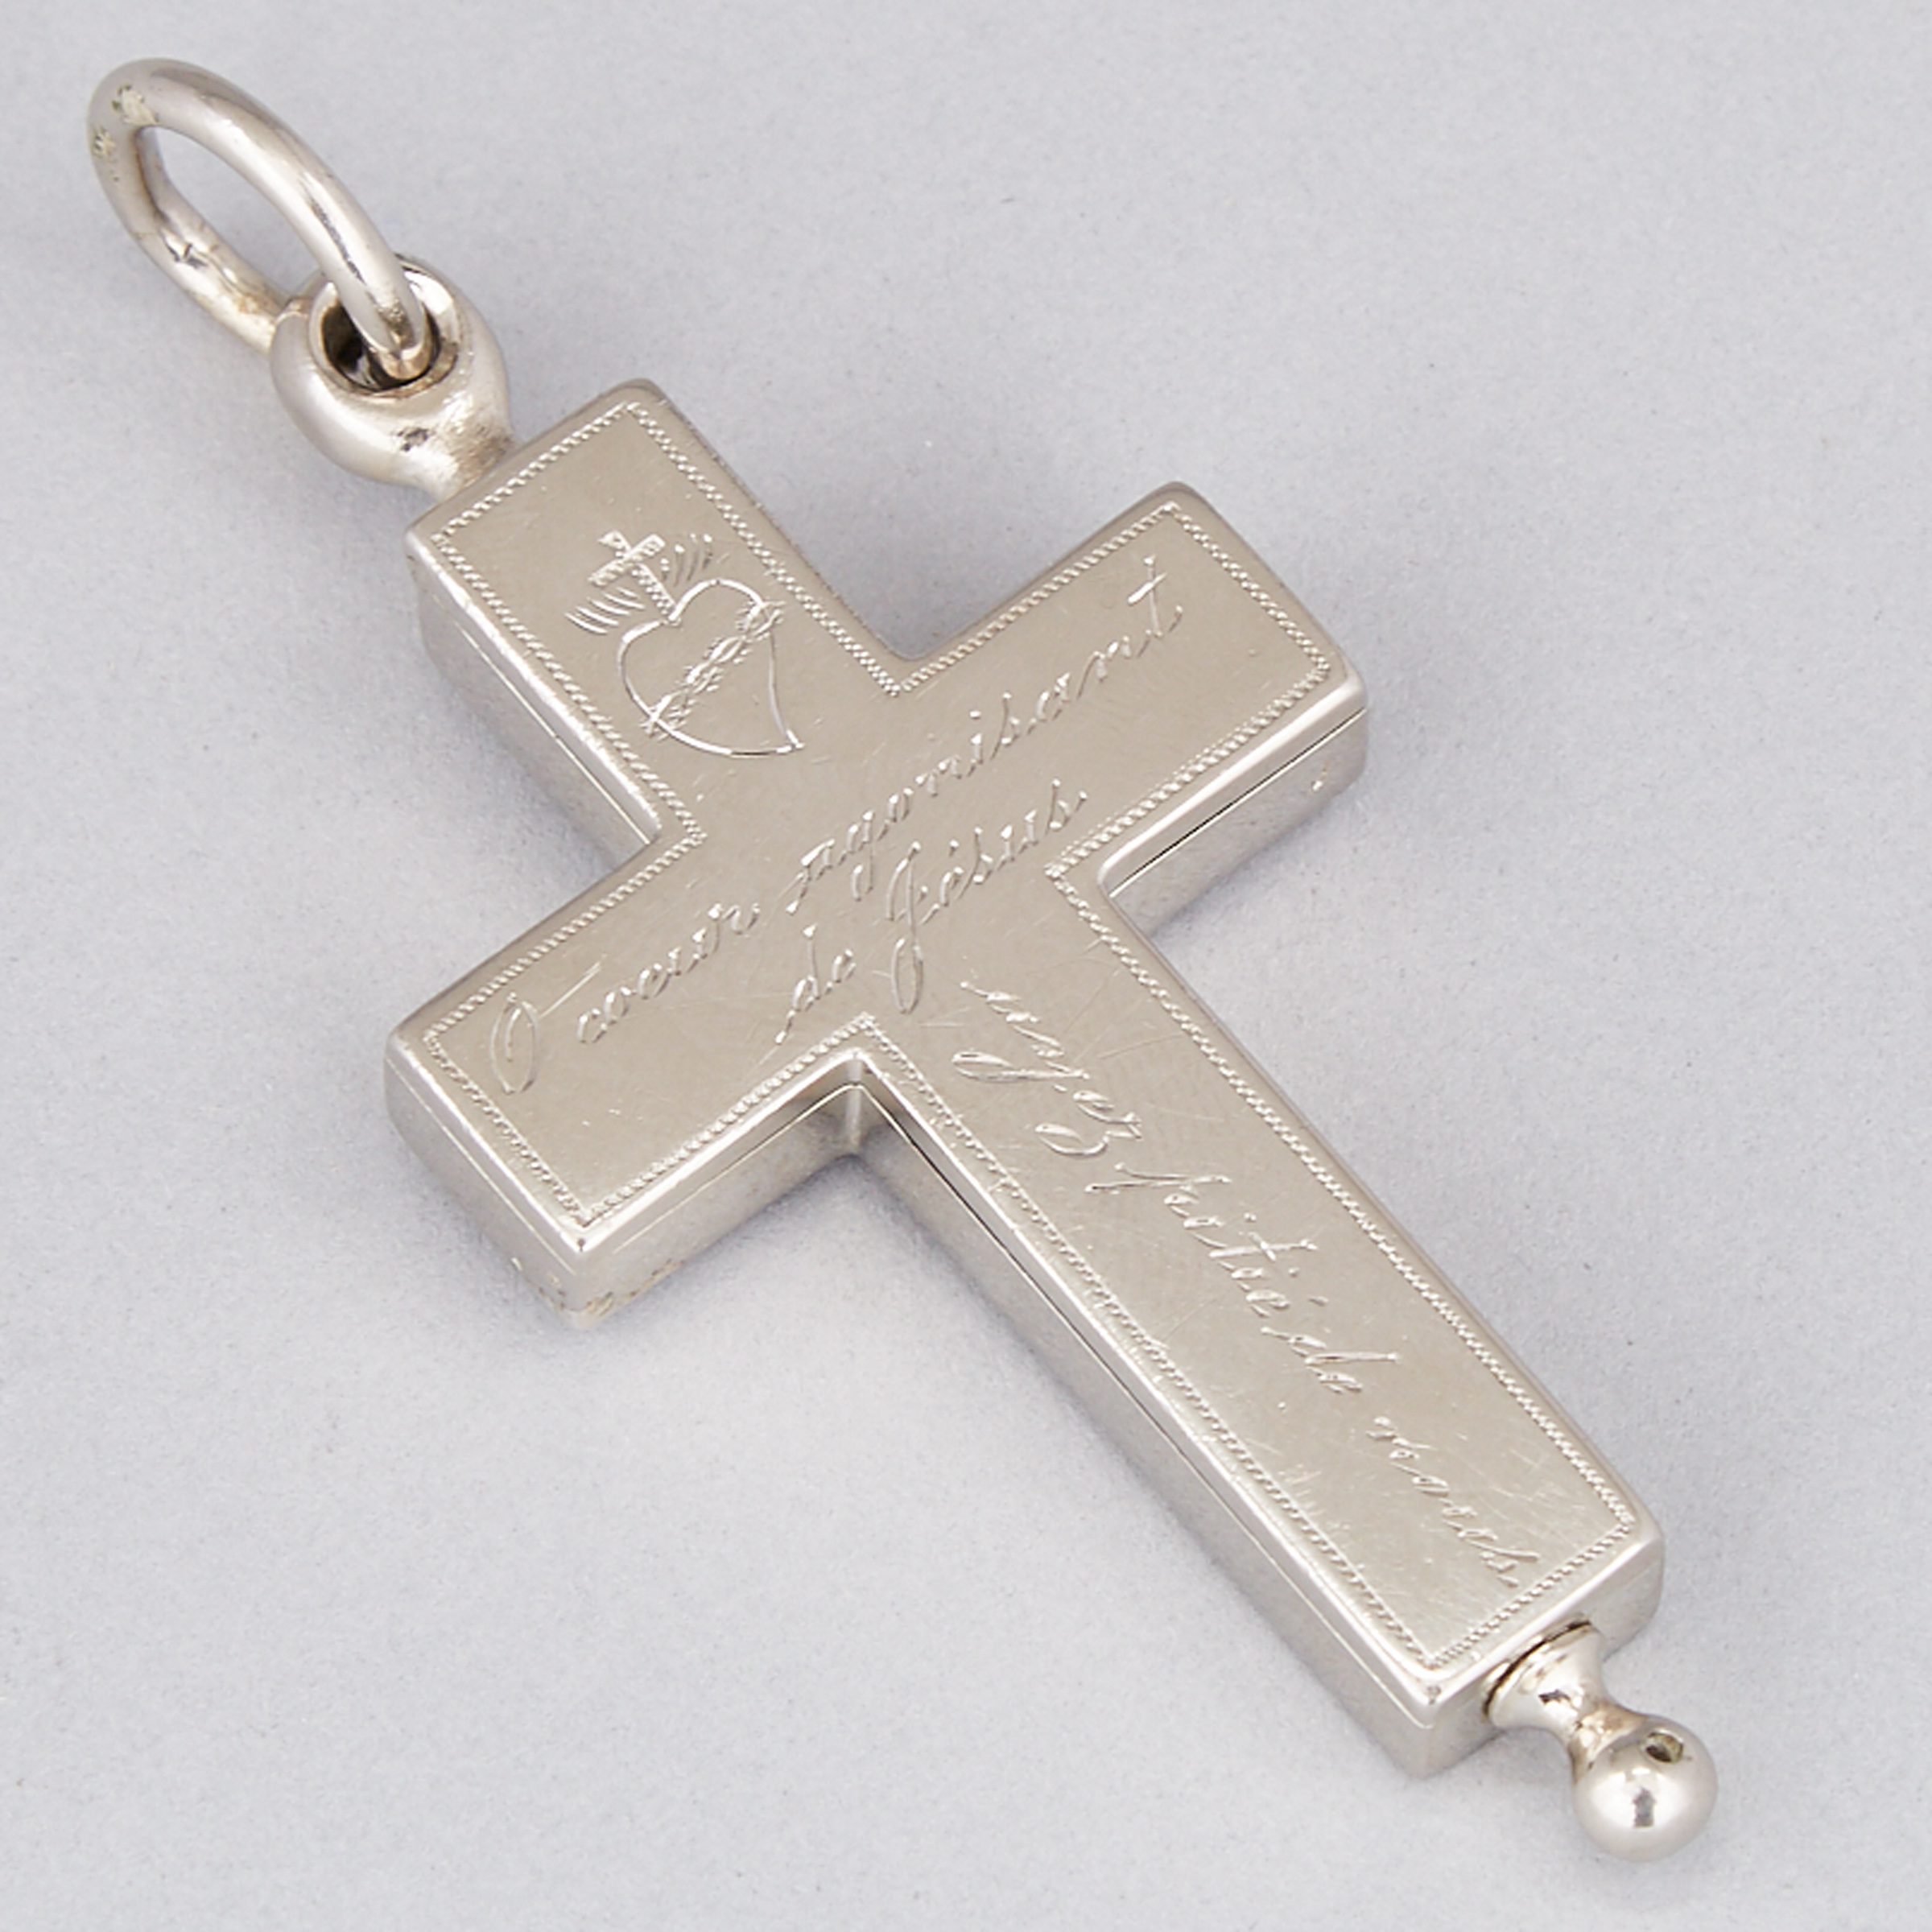 Canadian Silver Engraved Reliquary Cross, Ambroise LaFrance, Quebec City, Que., late 19th century